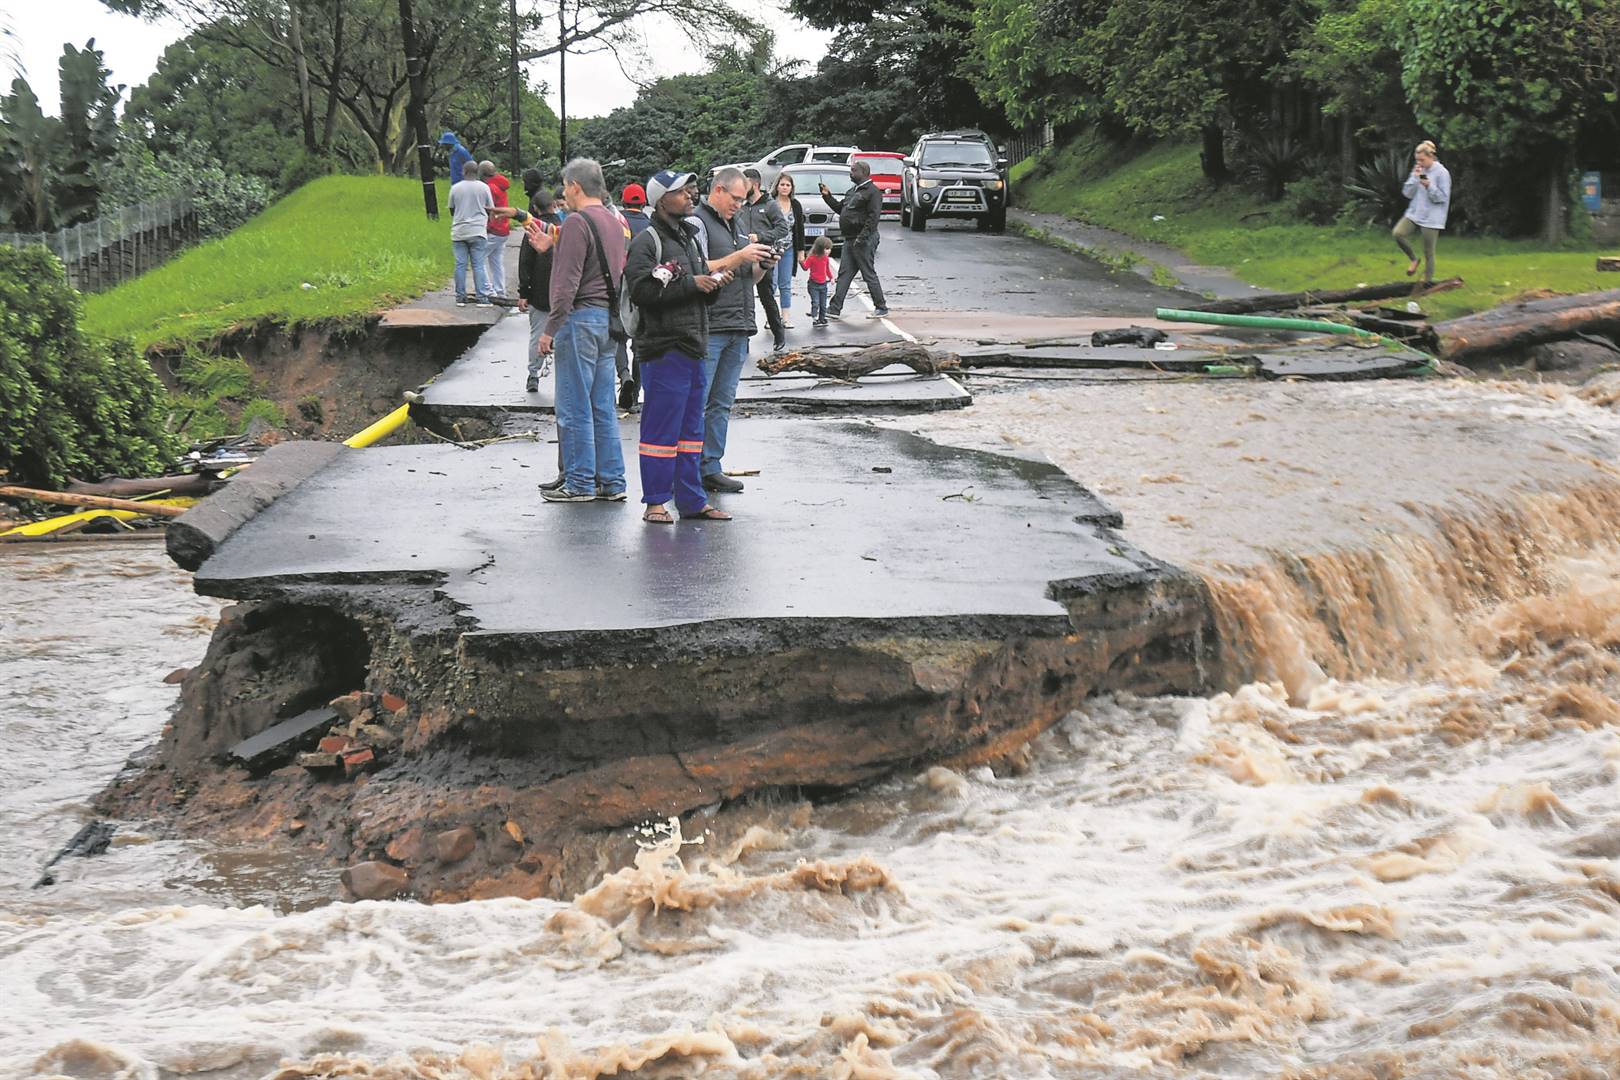 A road damaged by floods in KZN.